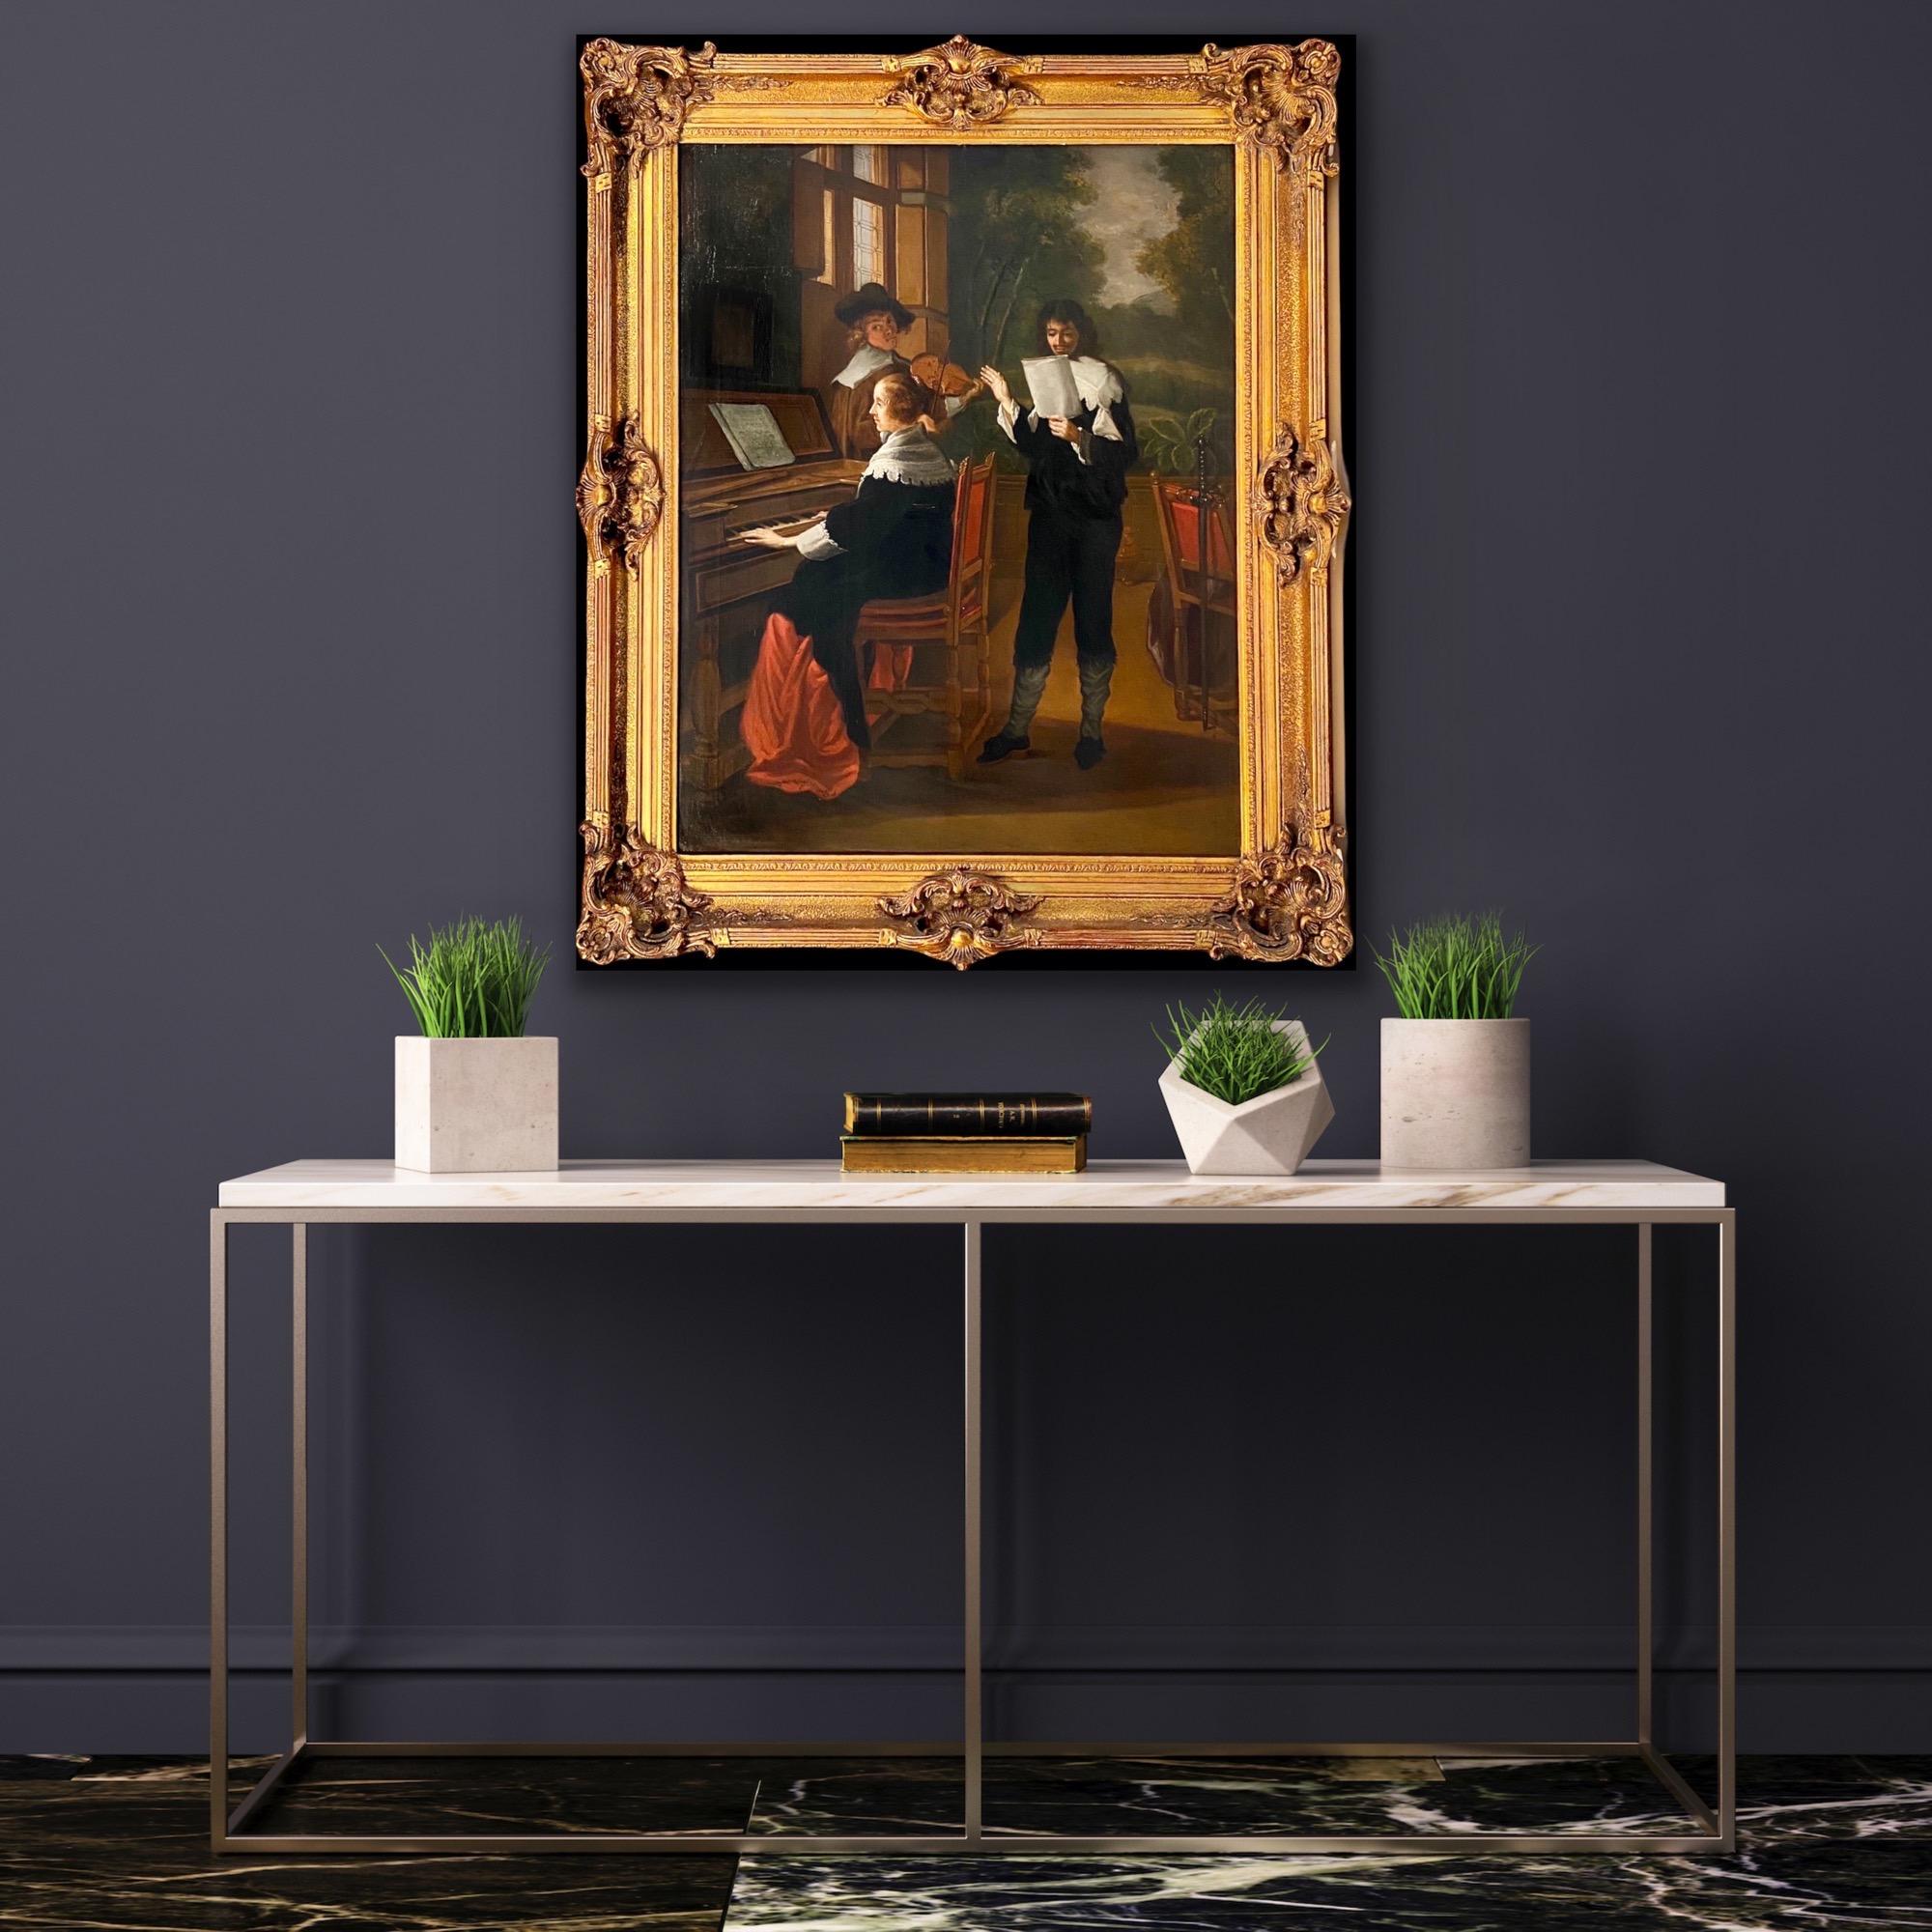 Huge 17th century dutch old master style painting - The Concert - Music Piano - Painting by Follower of Jan Vermeer 